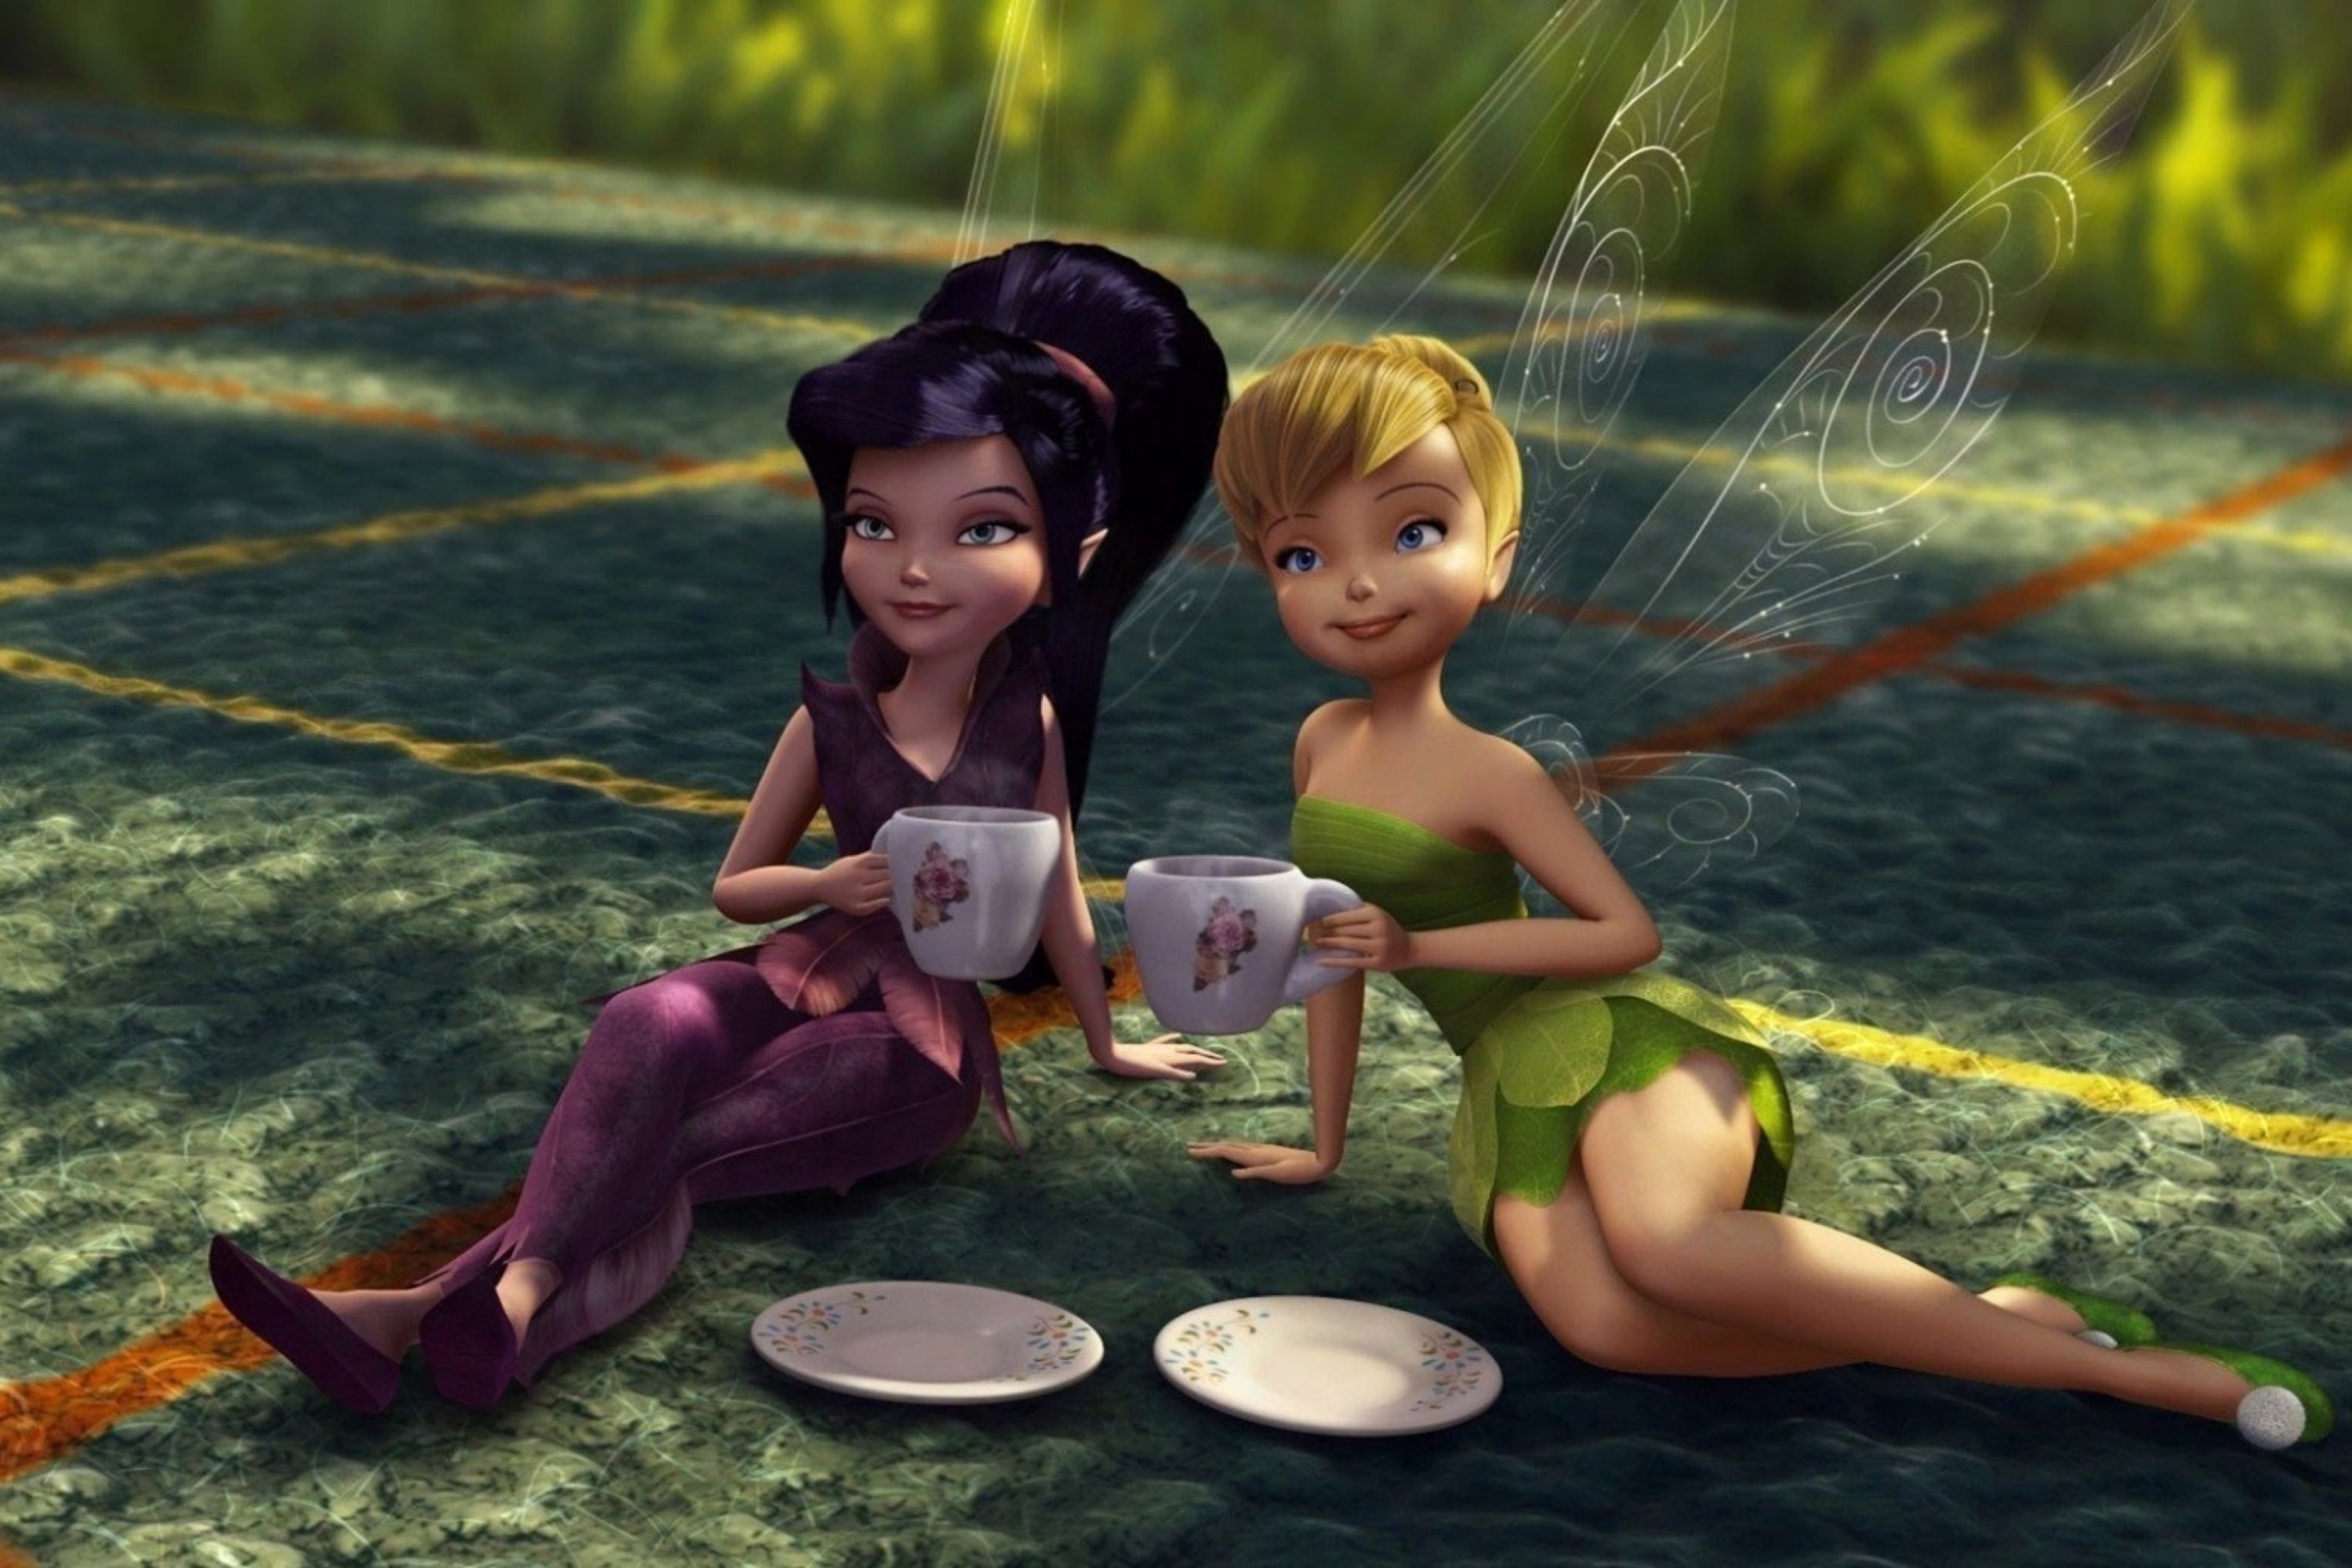 Das Tinker Bell And The Great Fairy Rescue Wallpaper 2880x1920